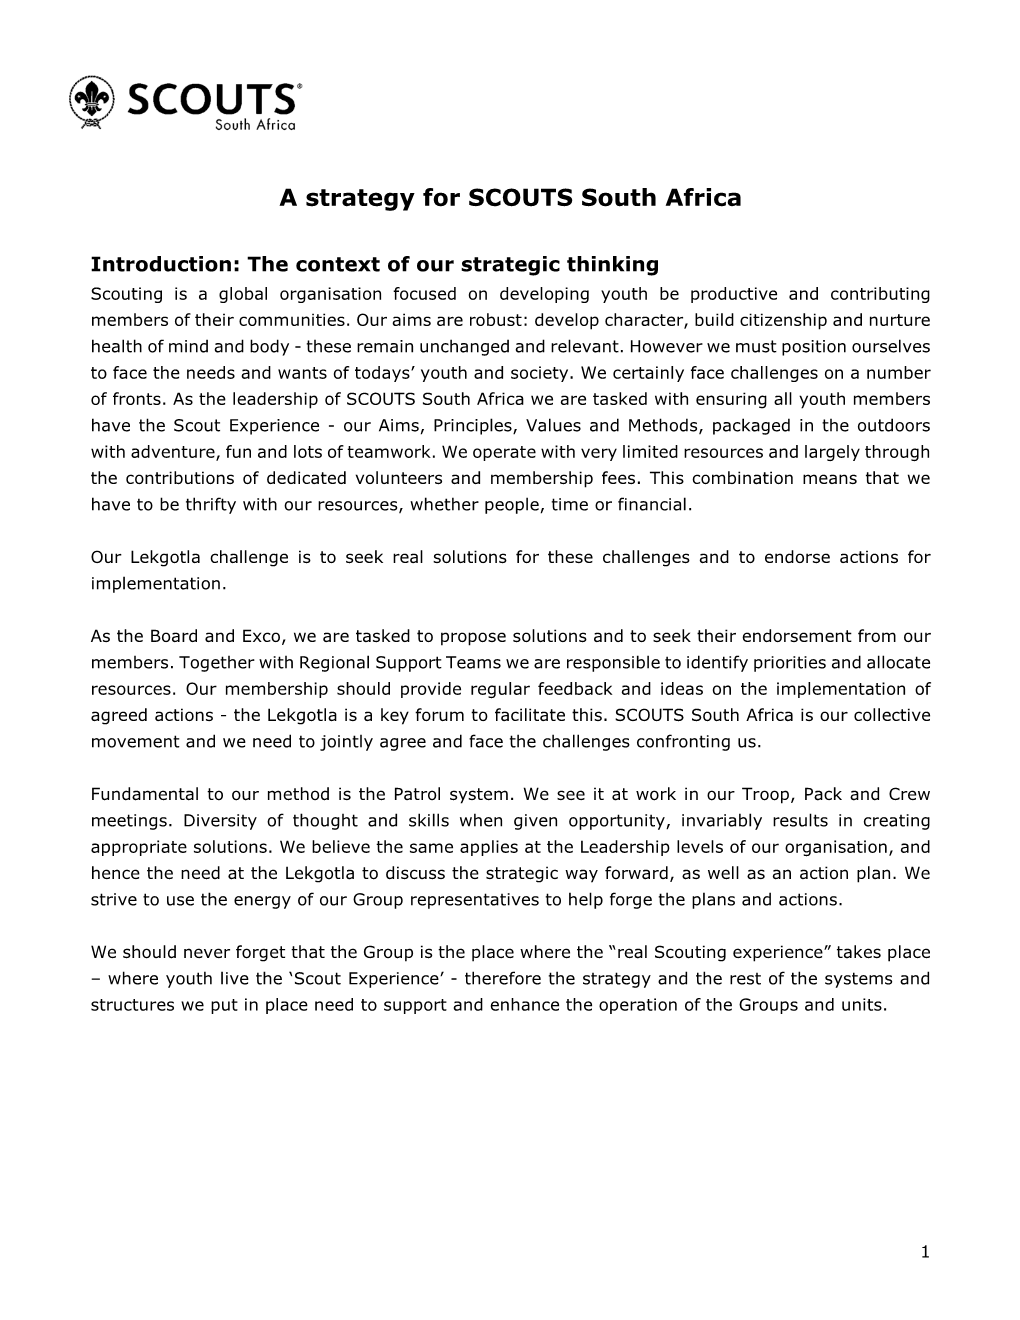 A Strategy for SCOUTS South Africa